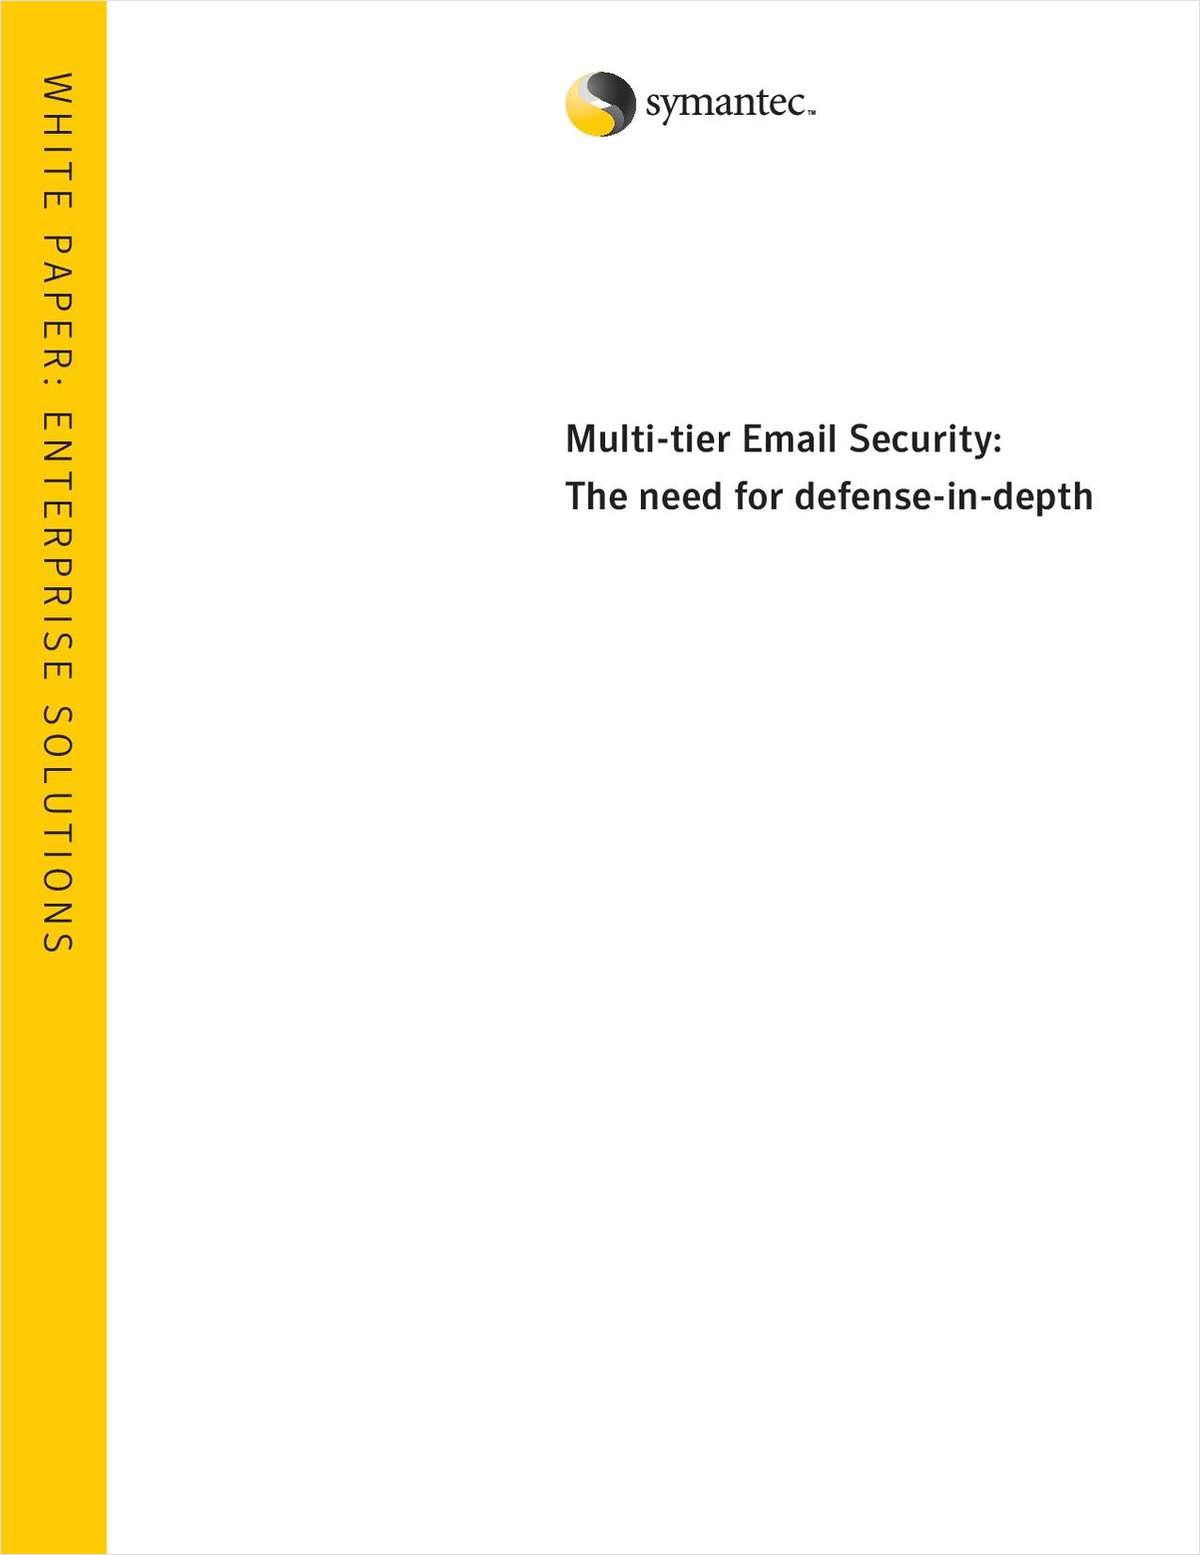 Multi-Tier Email Security: The Need for Defense-in-Depth